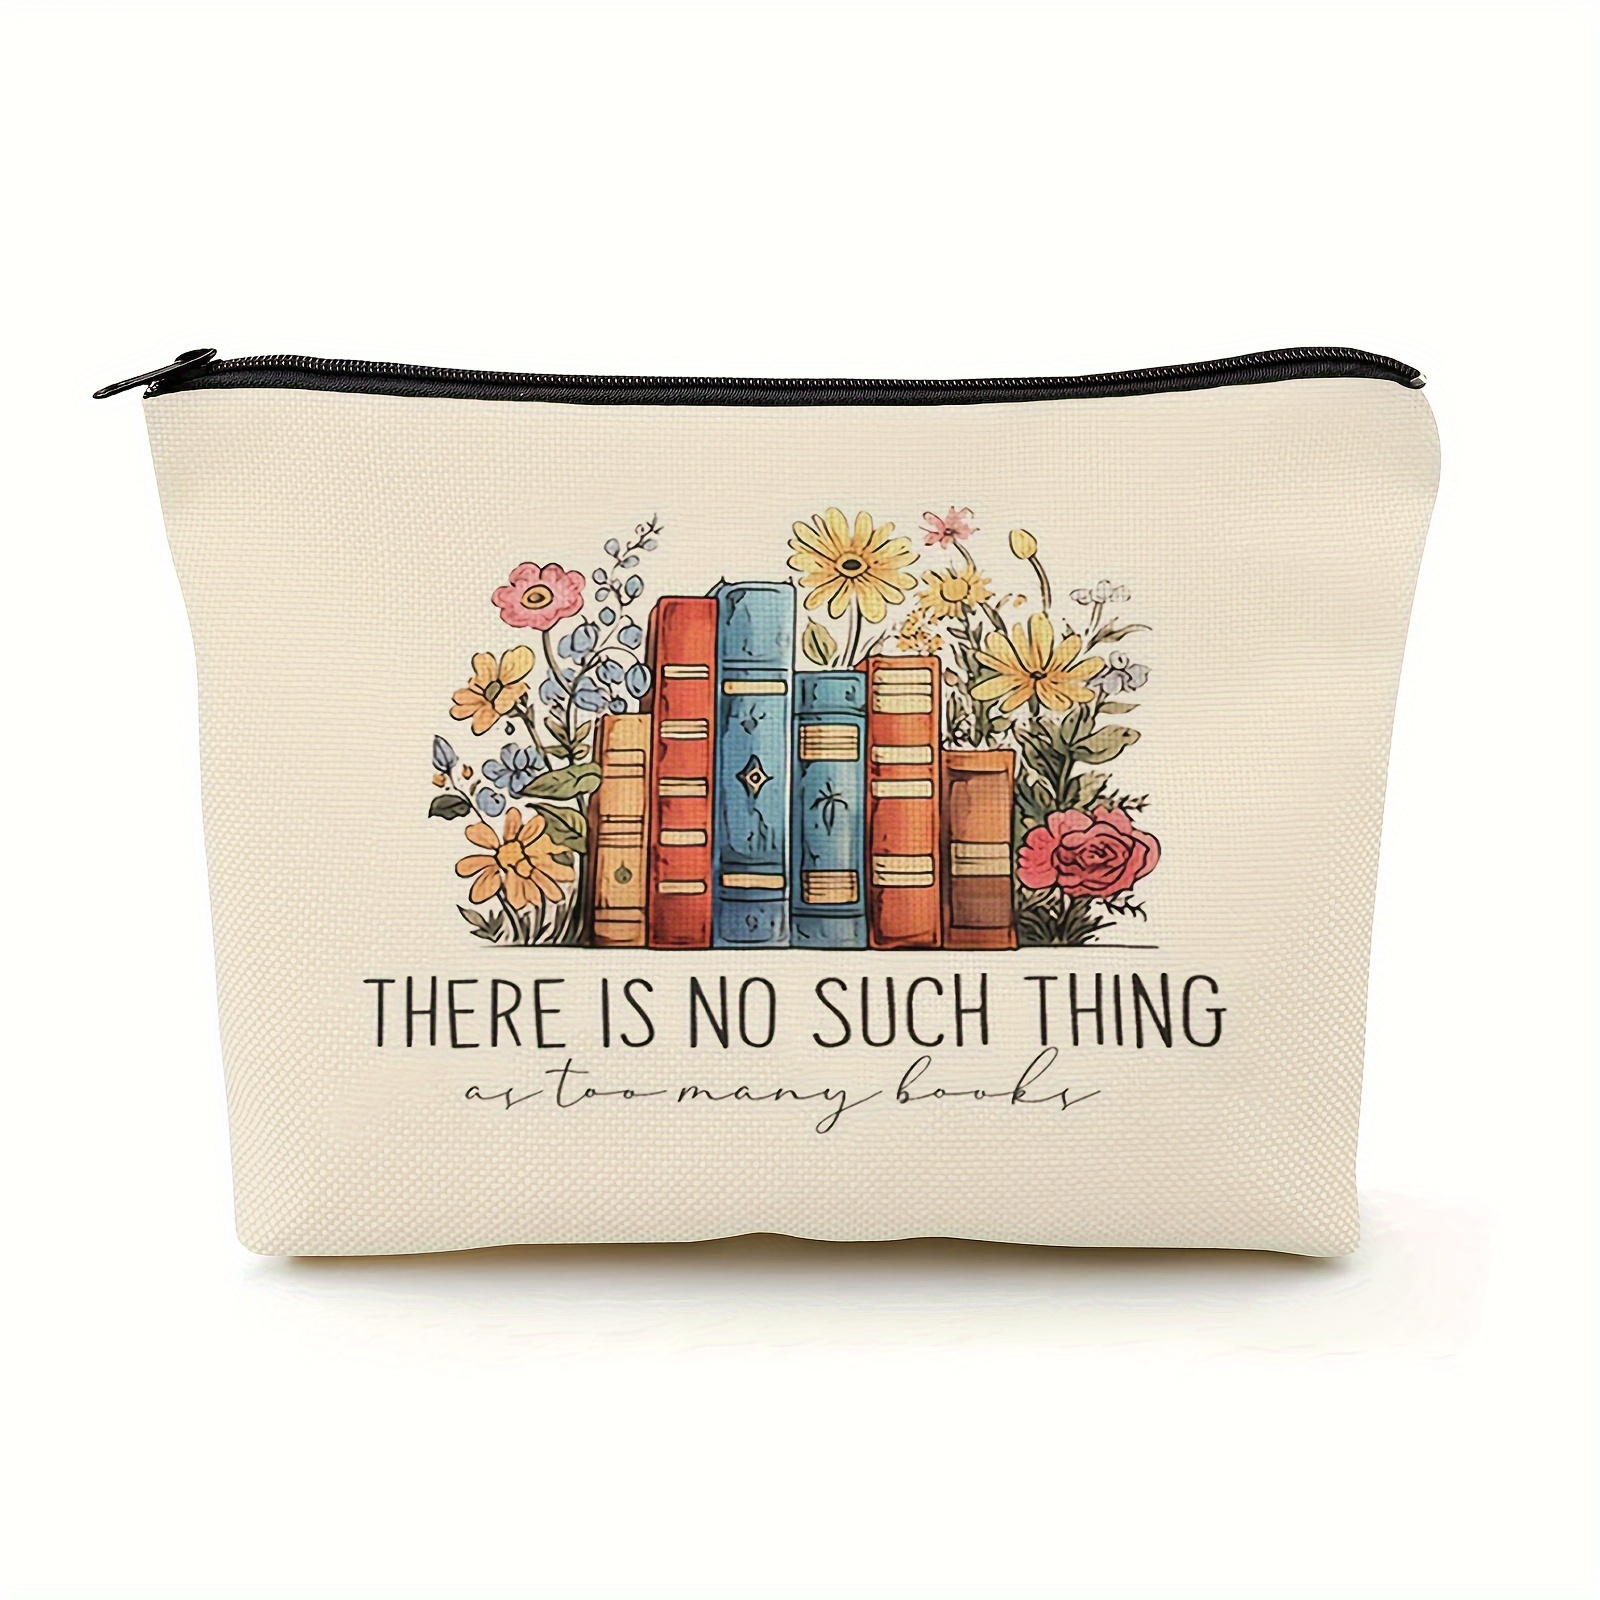 

Book-themed Makeup Bag For Women, Vintage Books & Floral Design Cosmetic Travel Pouch, Durable Portable Toiletry Organizer, Perfect Librarian Or Book Lover Gift For Christmas Or Birthday